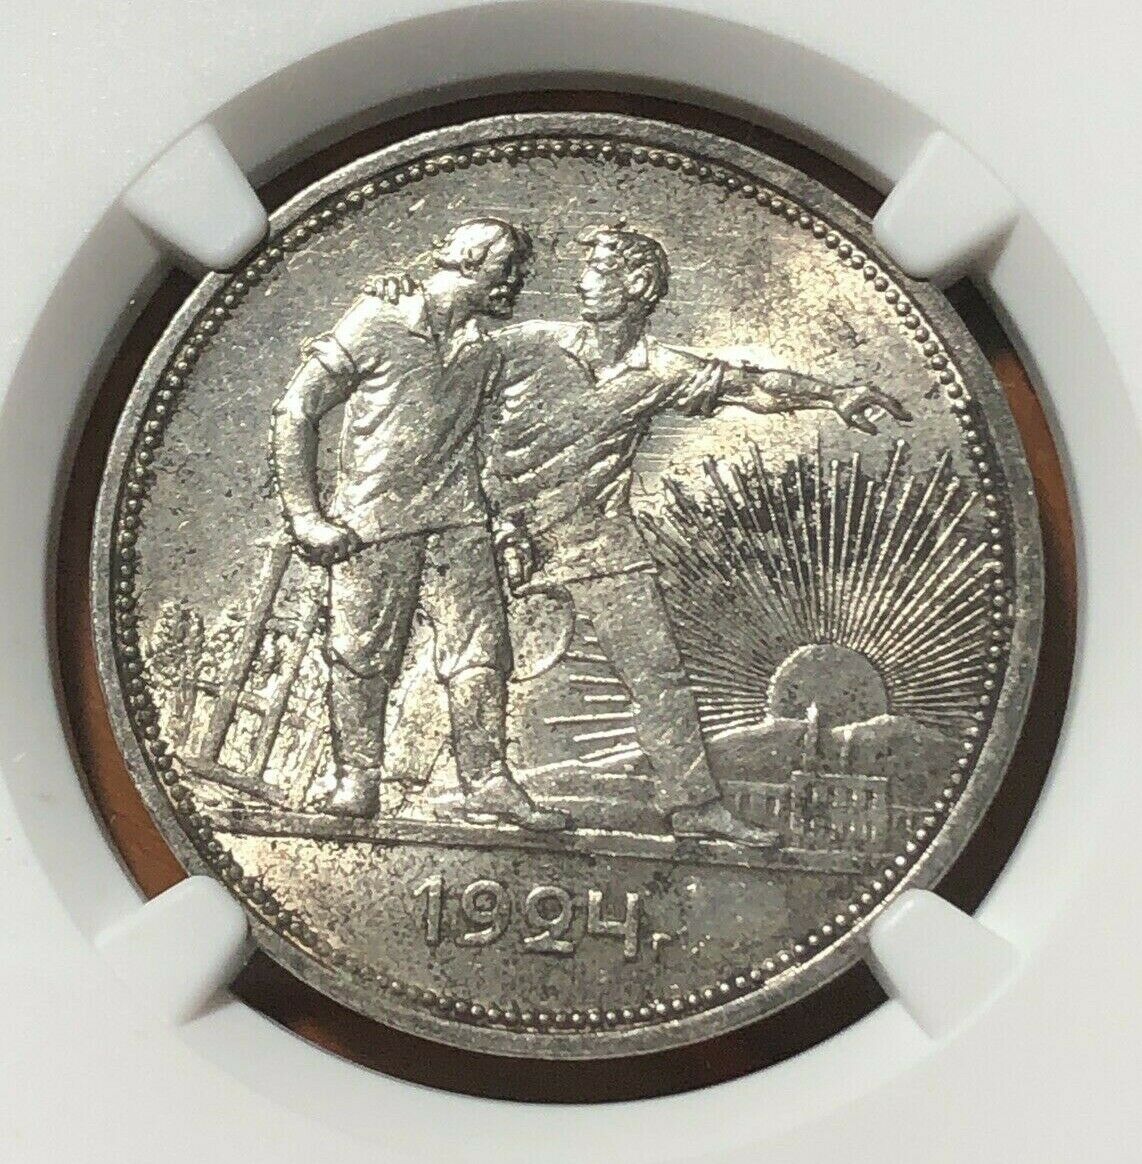 Russia Ussr 1924 Silver Rouble - Ngc Ms62